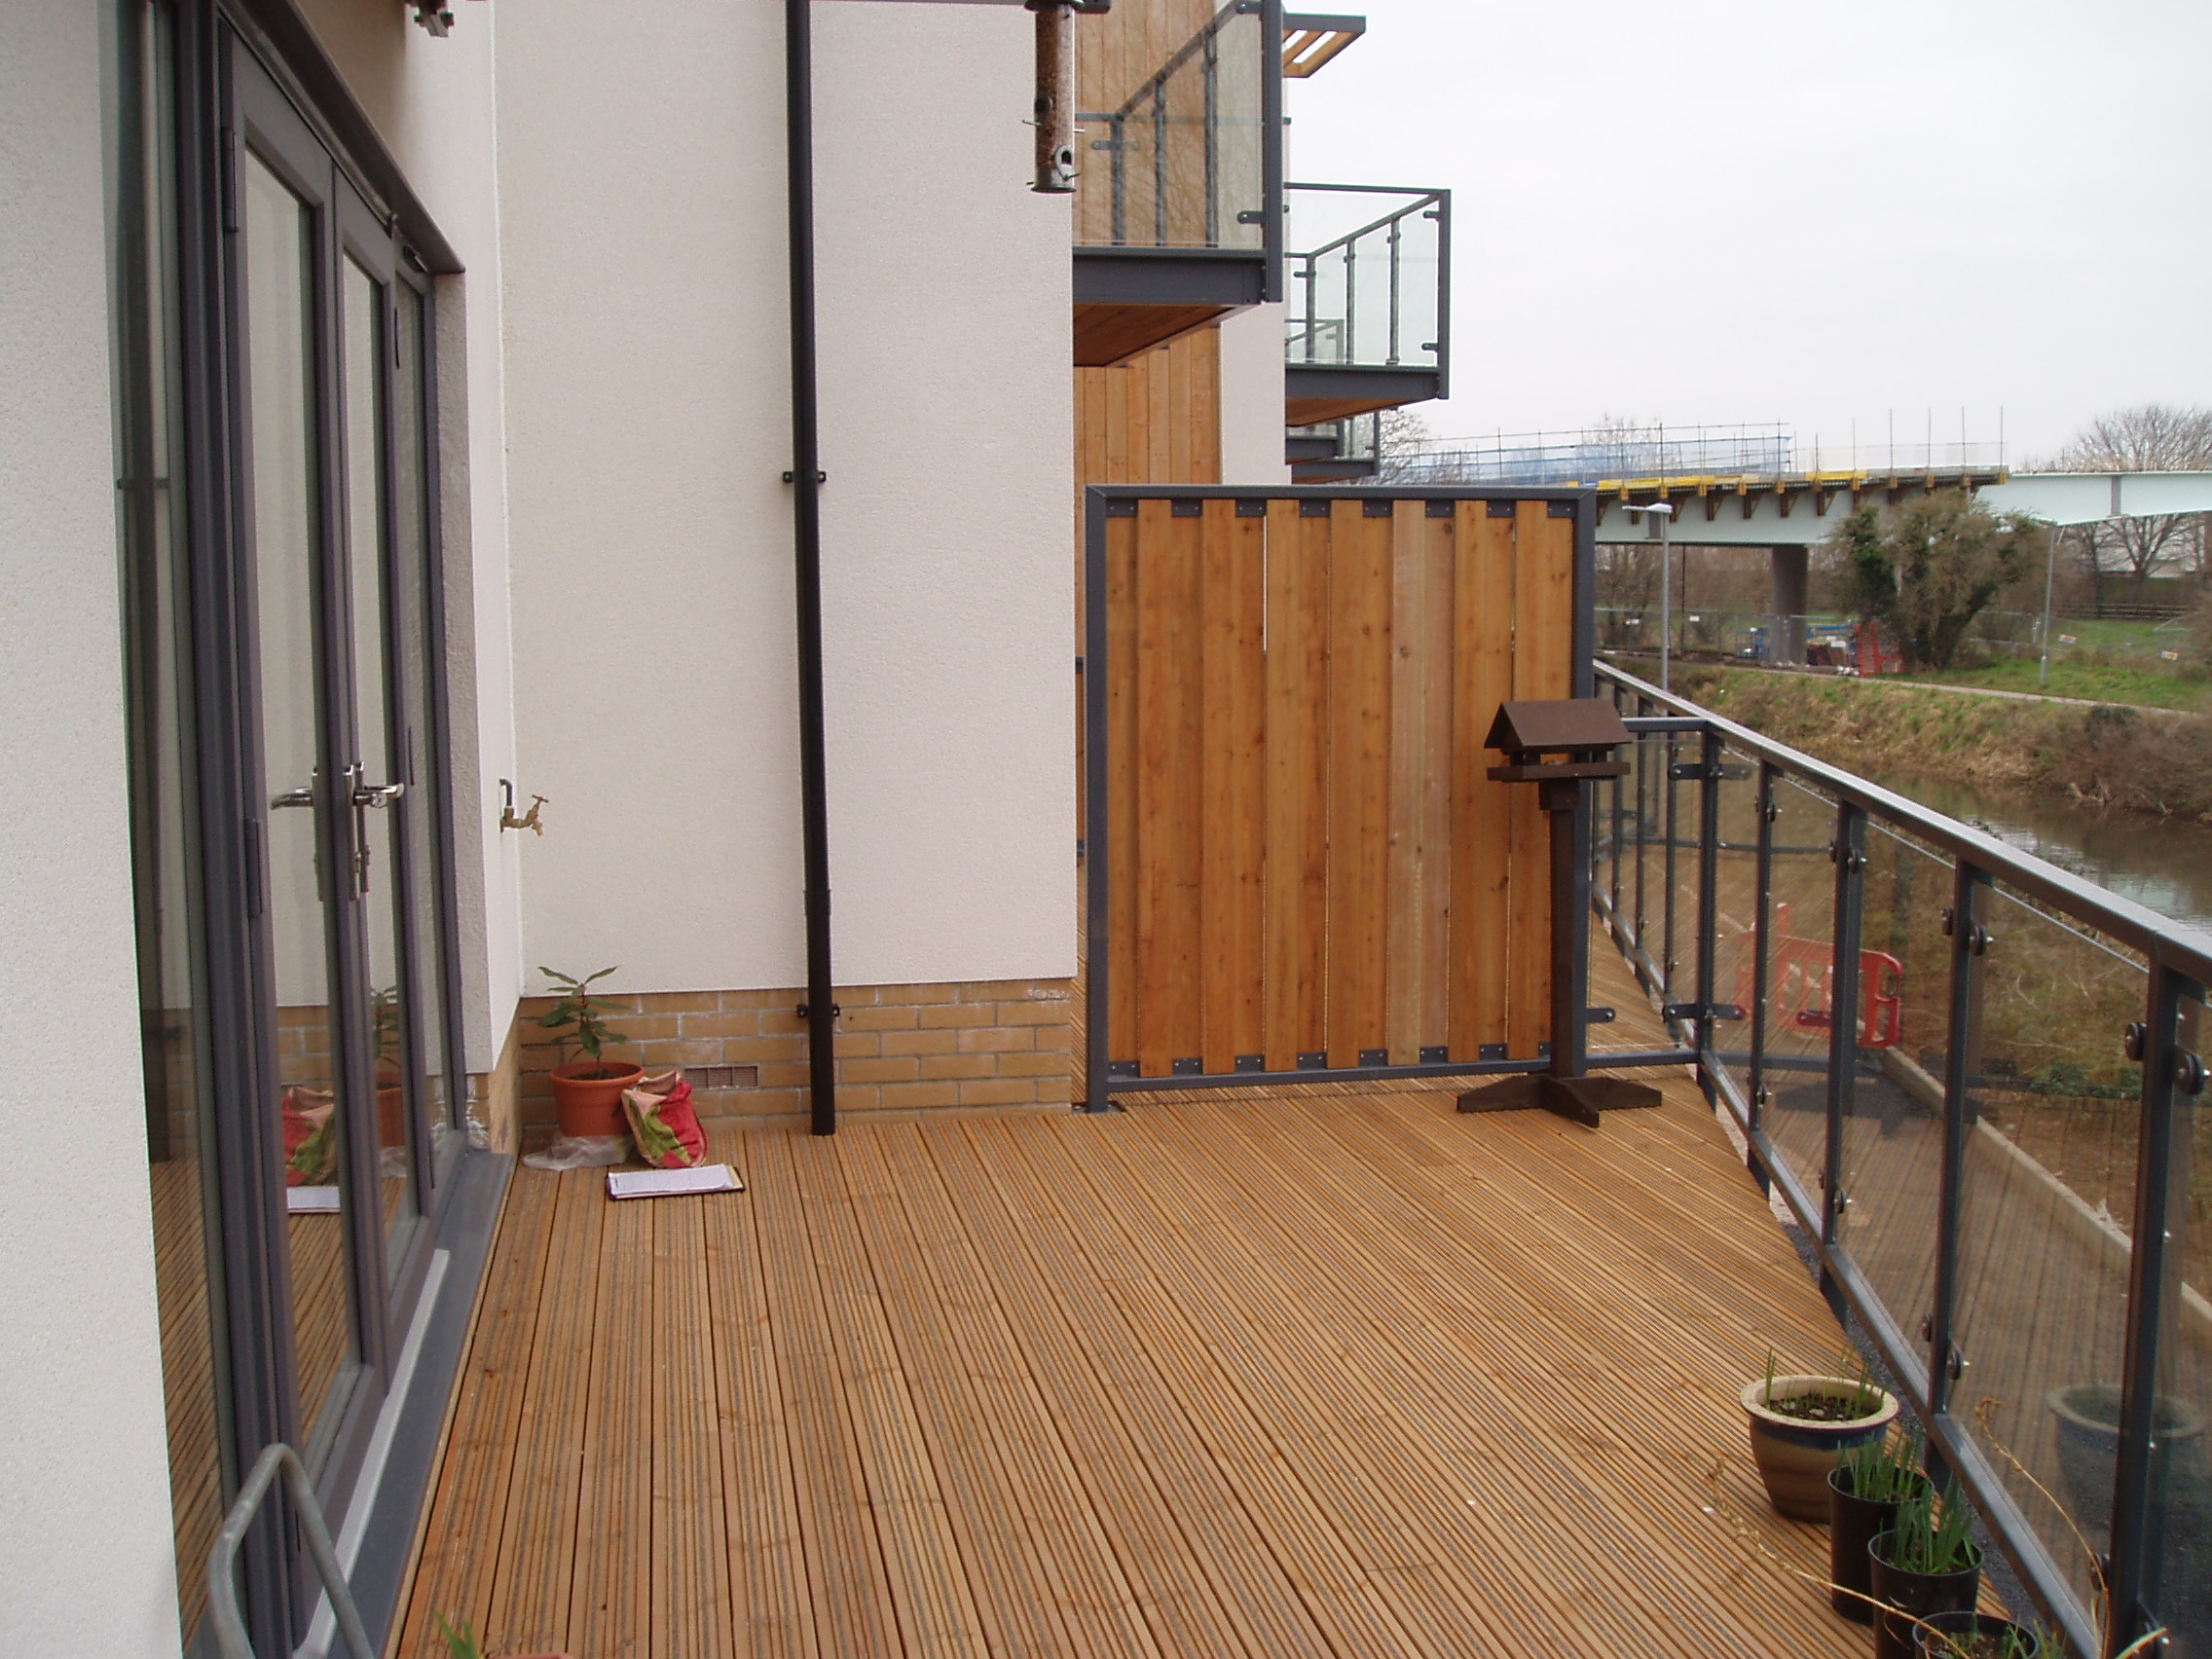 Roof terrace - before